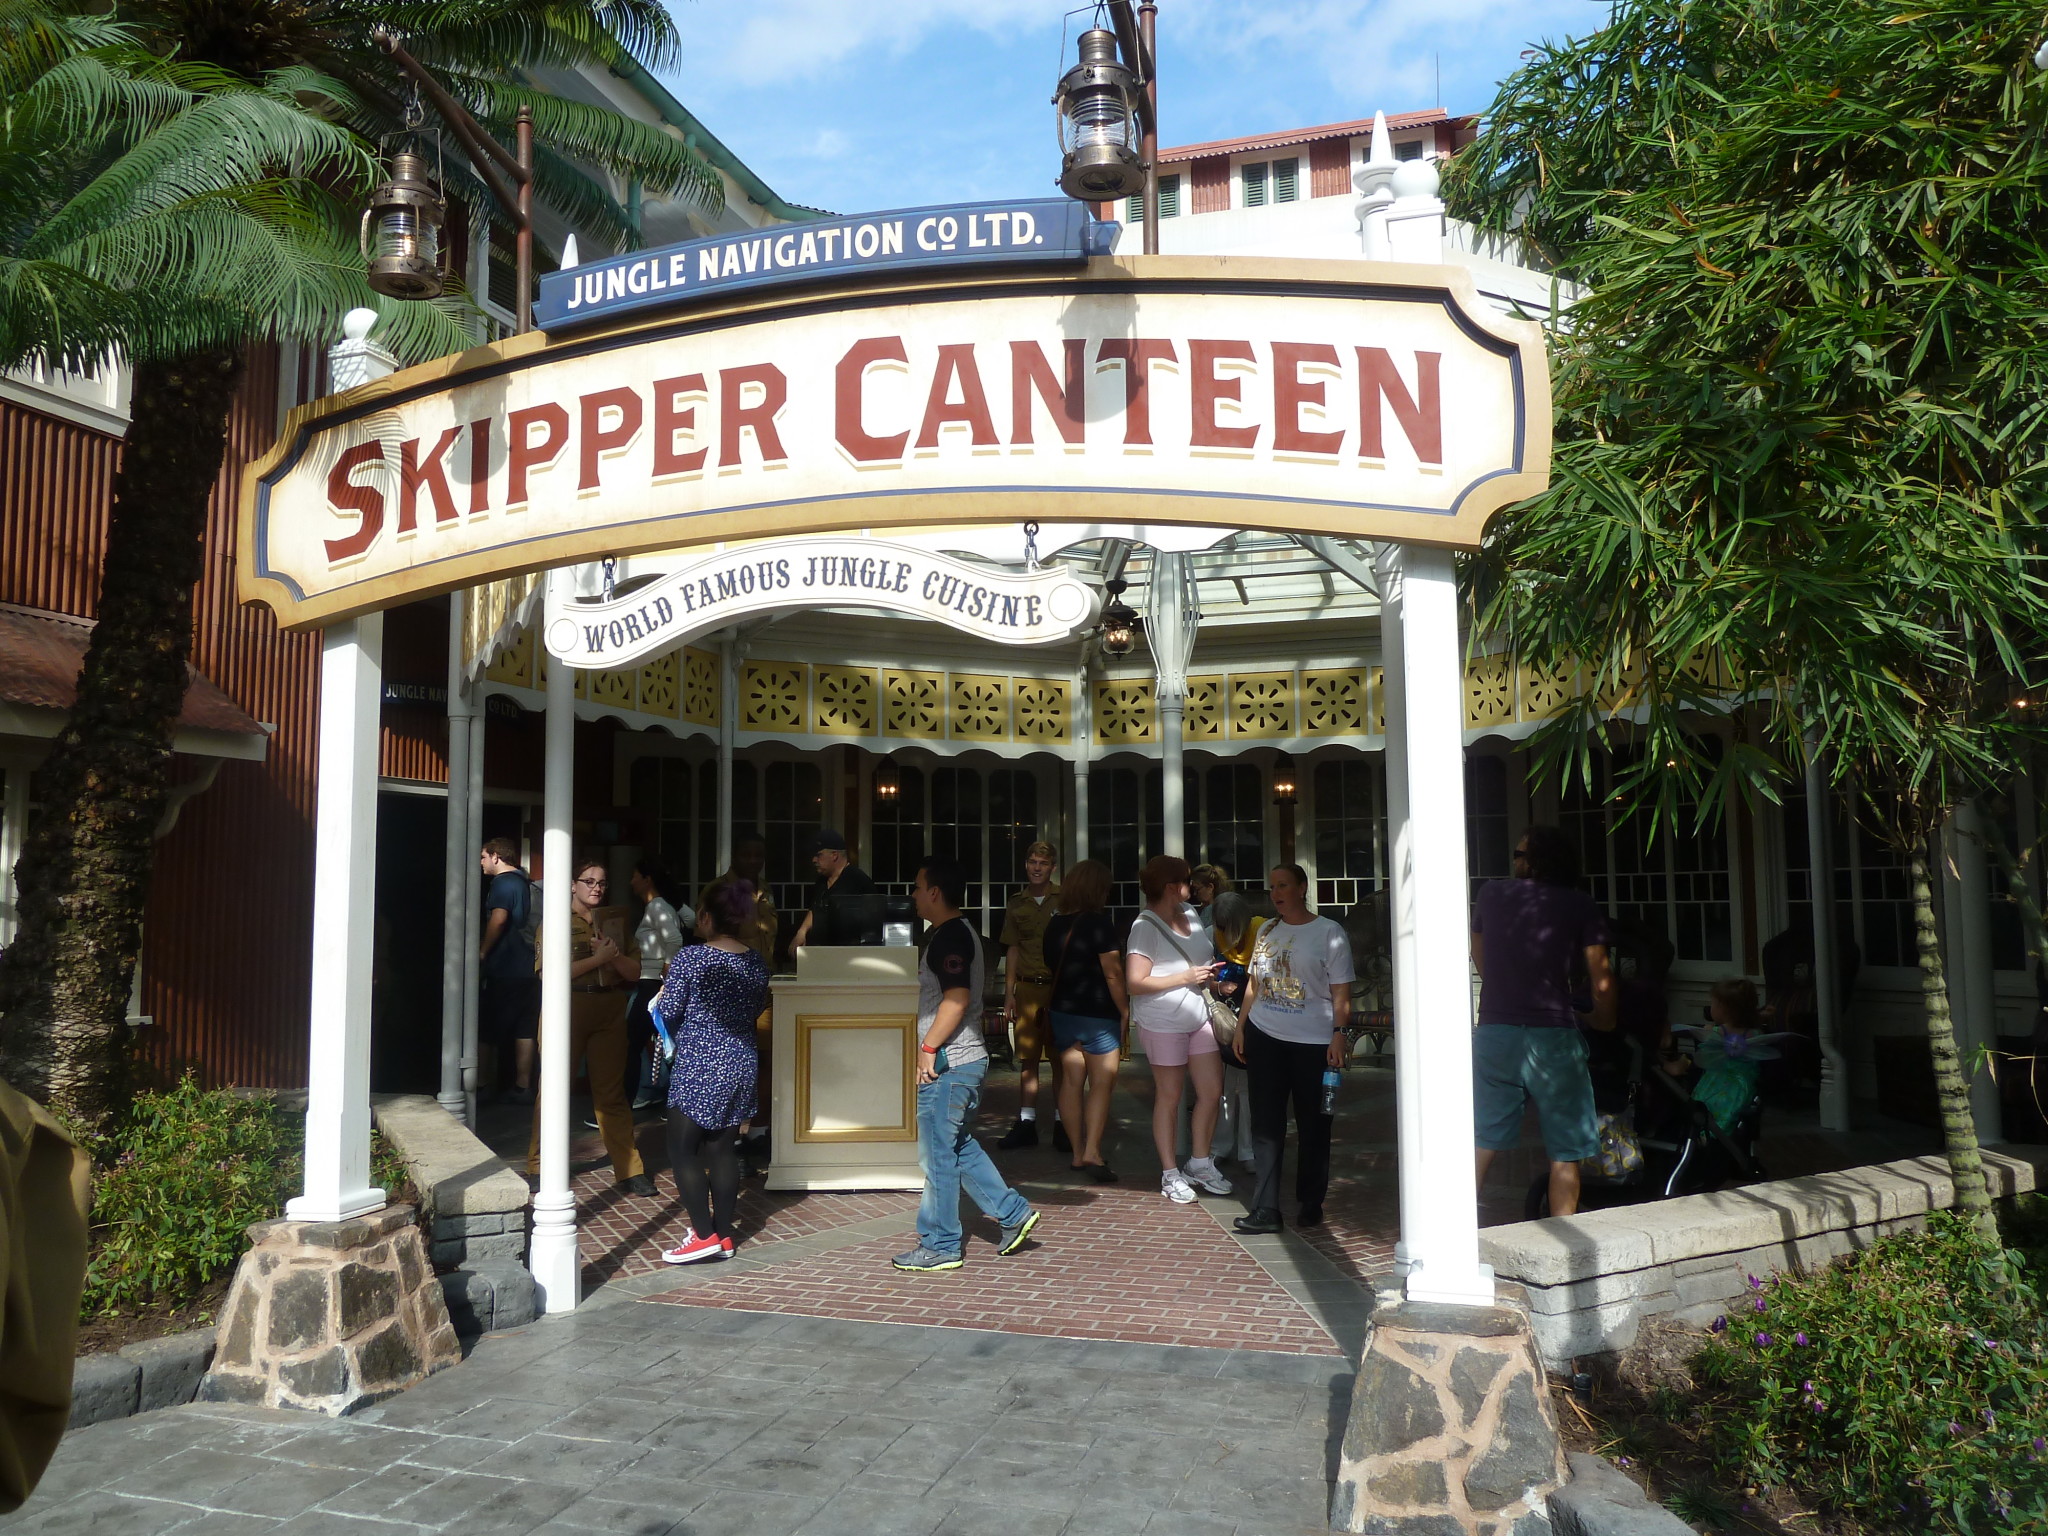 Skipper Canteen to begin accepting Advance Dining Reservations